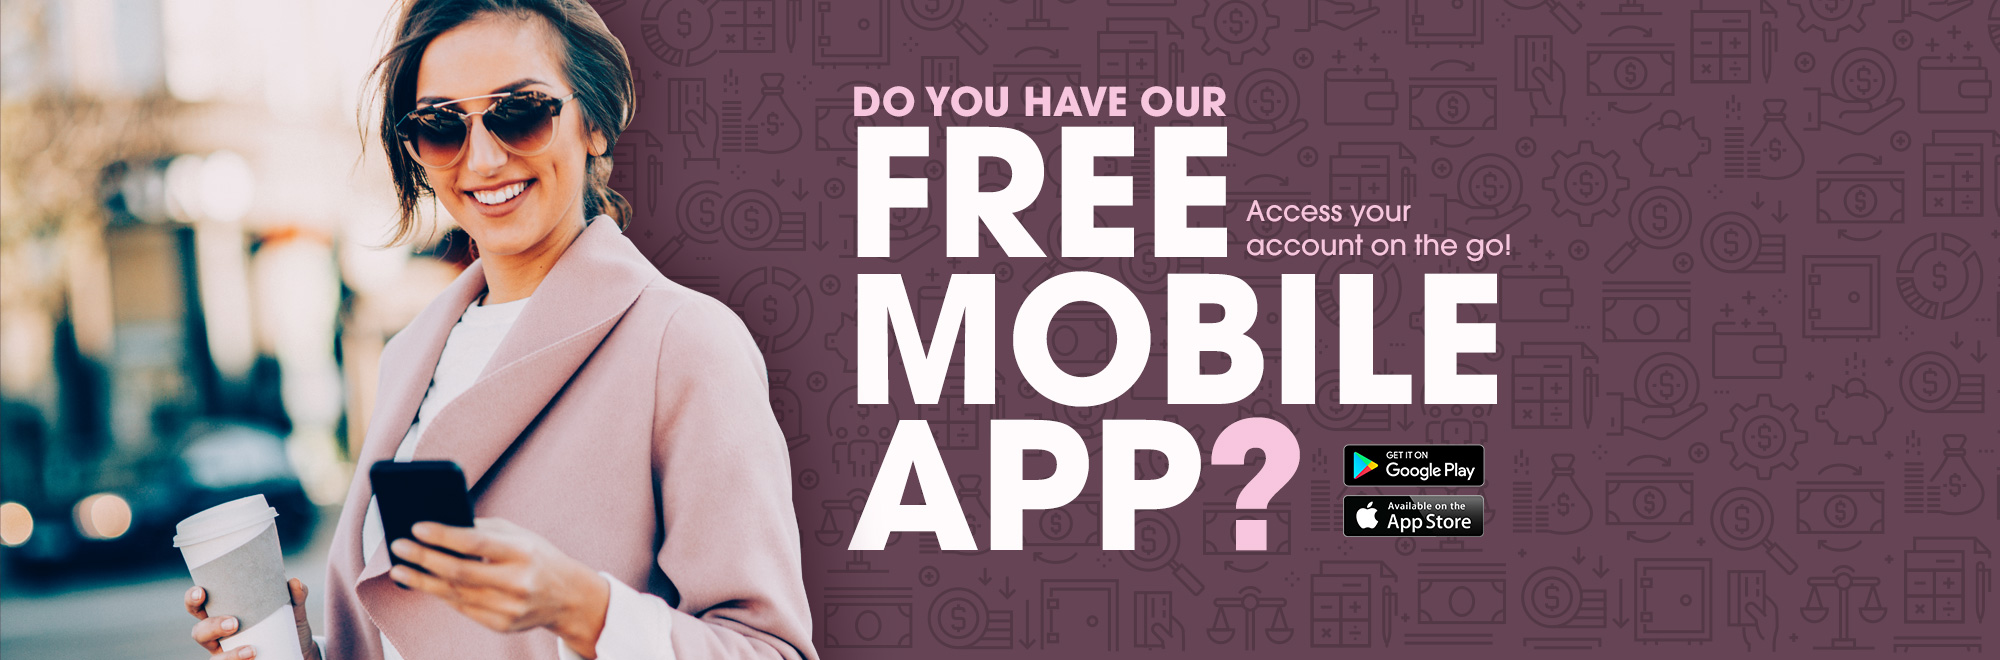 Do you have our free mobile app? Access your account on the go.